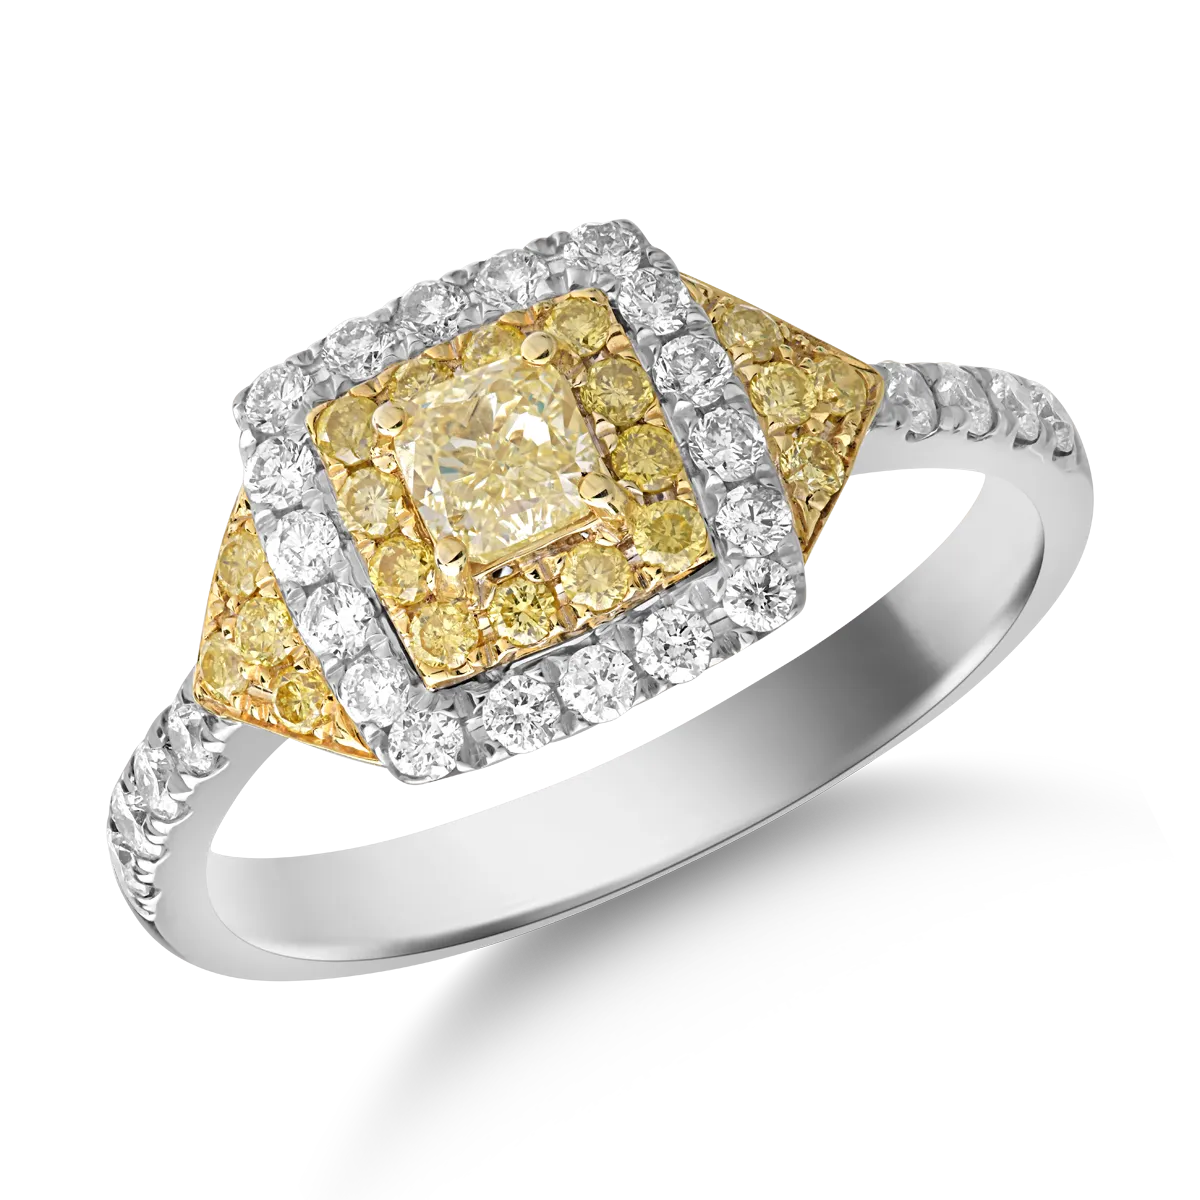 18K white-yellow gold ring with 0.39ct clear diamonds and 0.54ct yellow diamonds